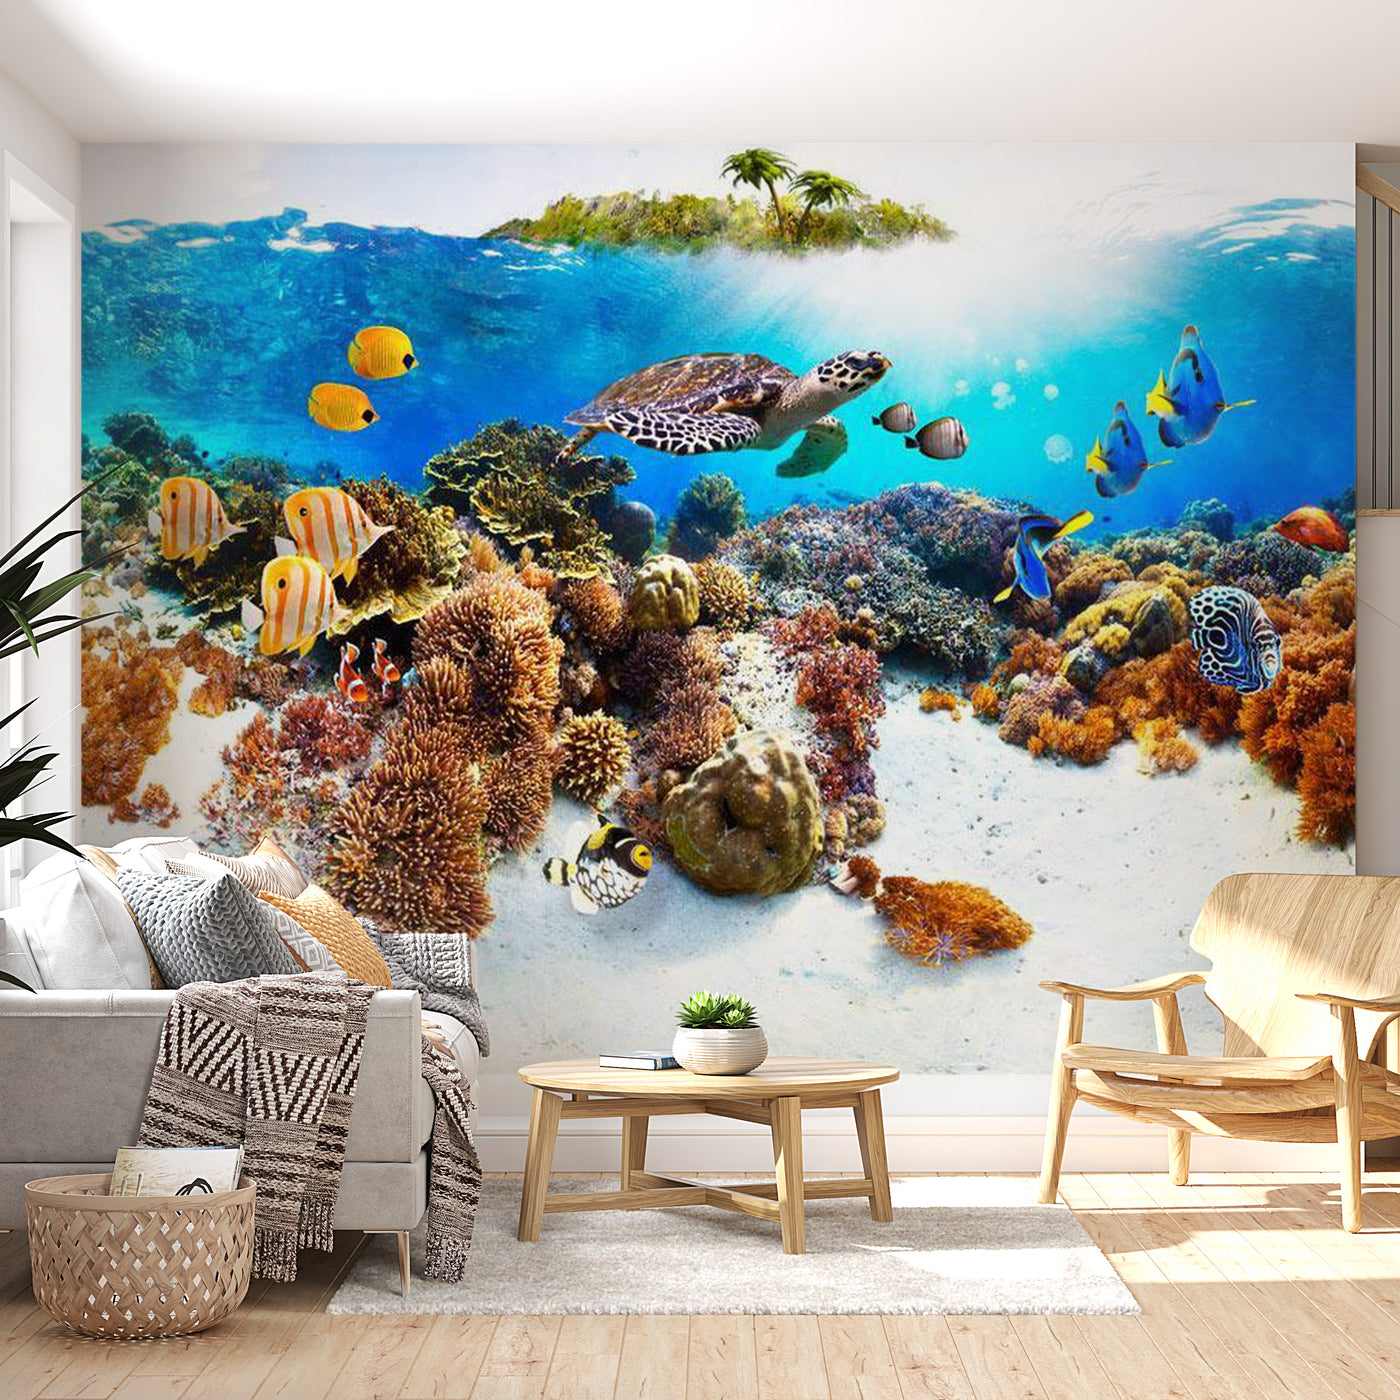 Peel & Stick Tropical Wall Mural - Ocean Turtle Reef - Removable Wall Decals